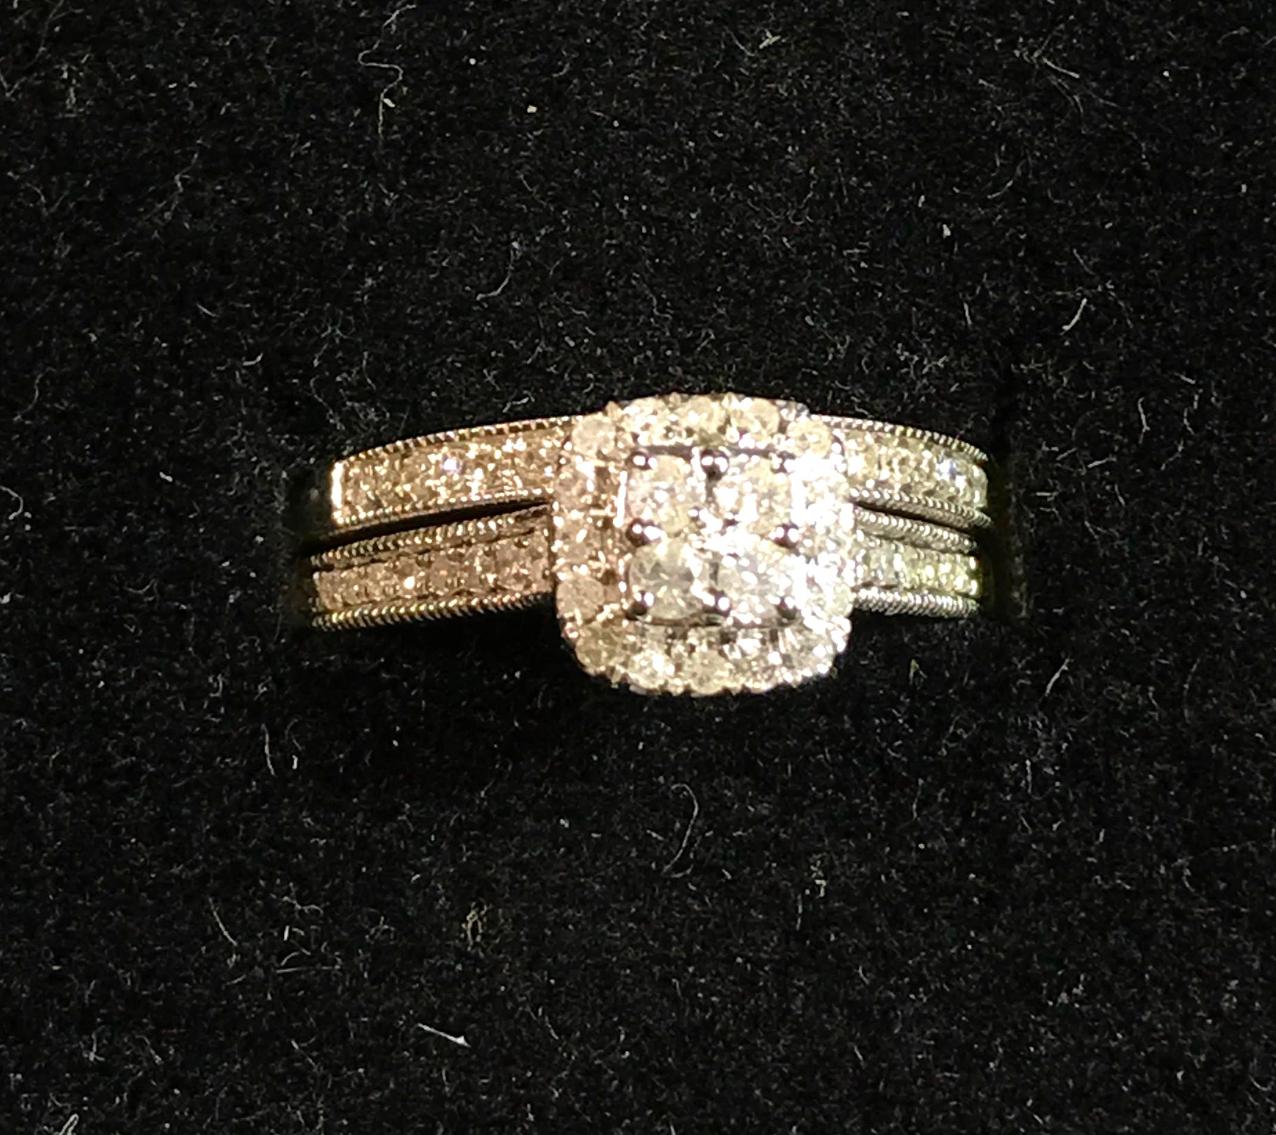 New Diamond Jewelry: Wedding Sets, Engagement Rings, Men's Bands and Other Fine Jewelry